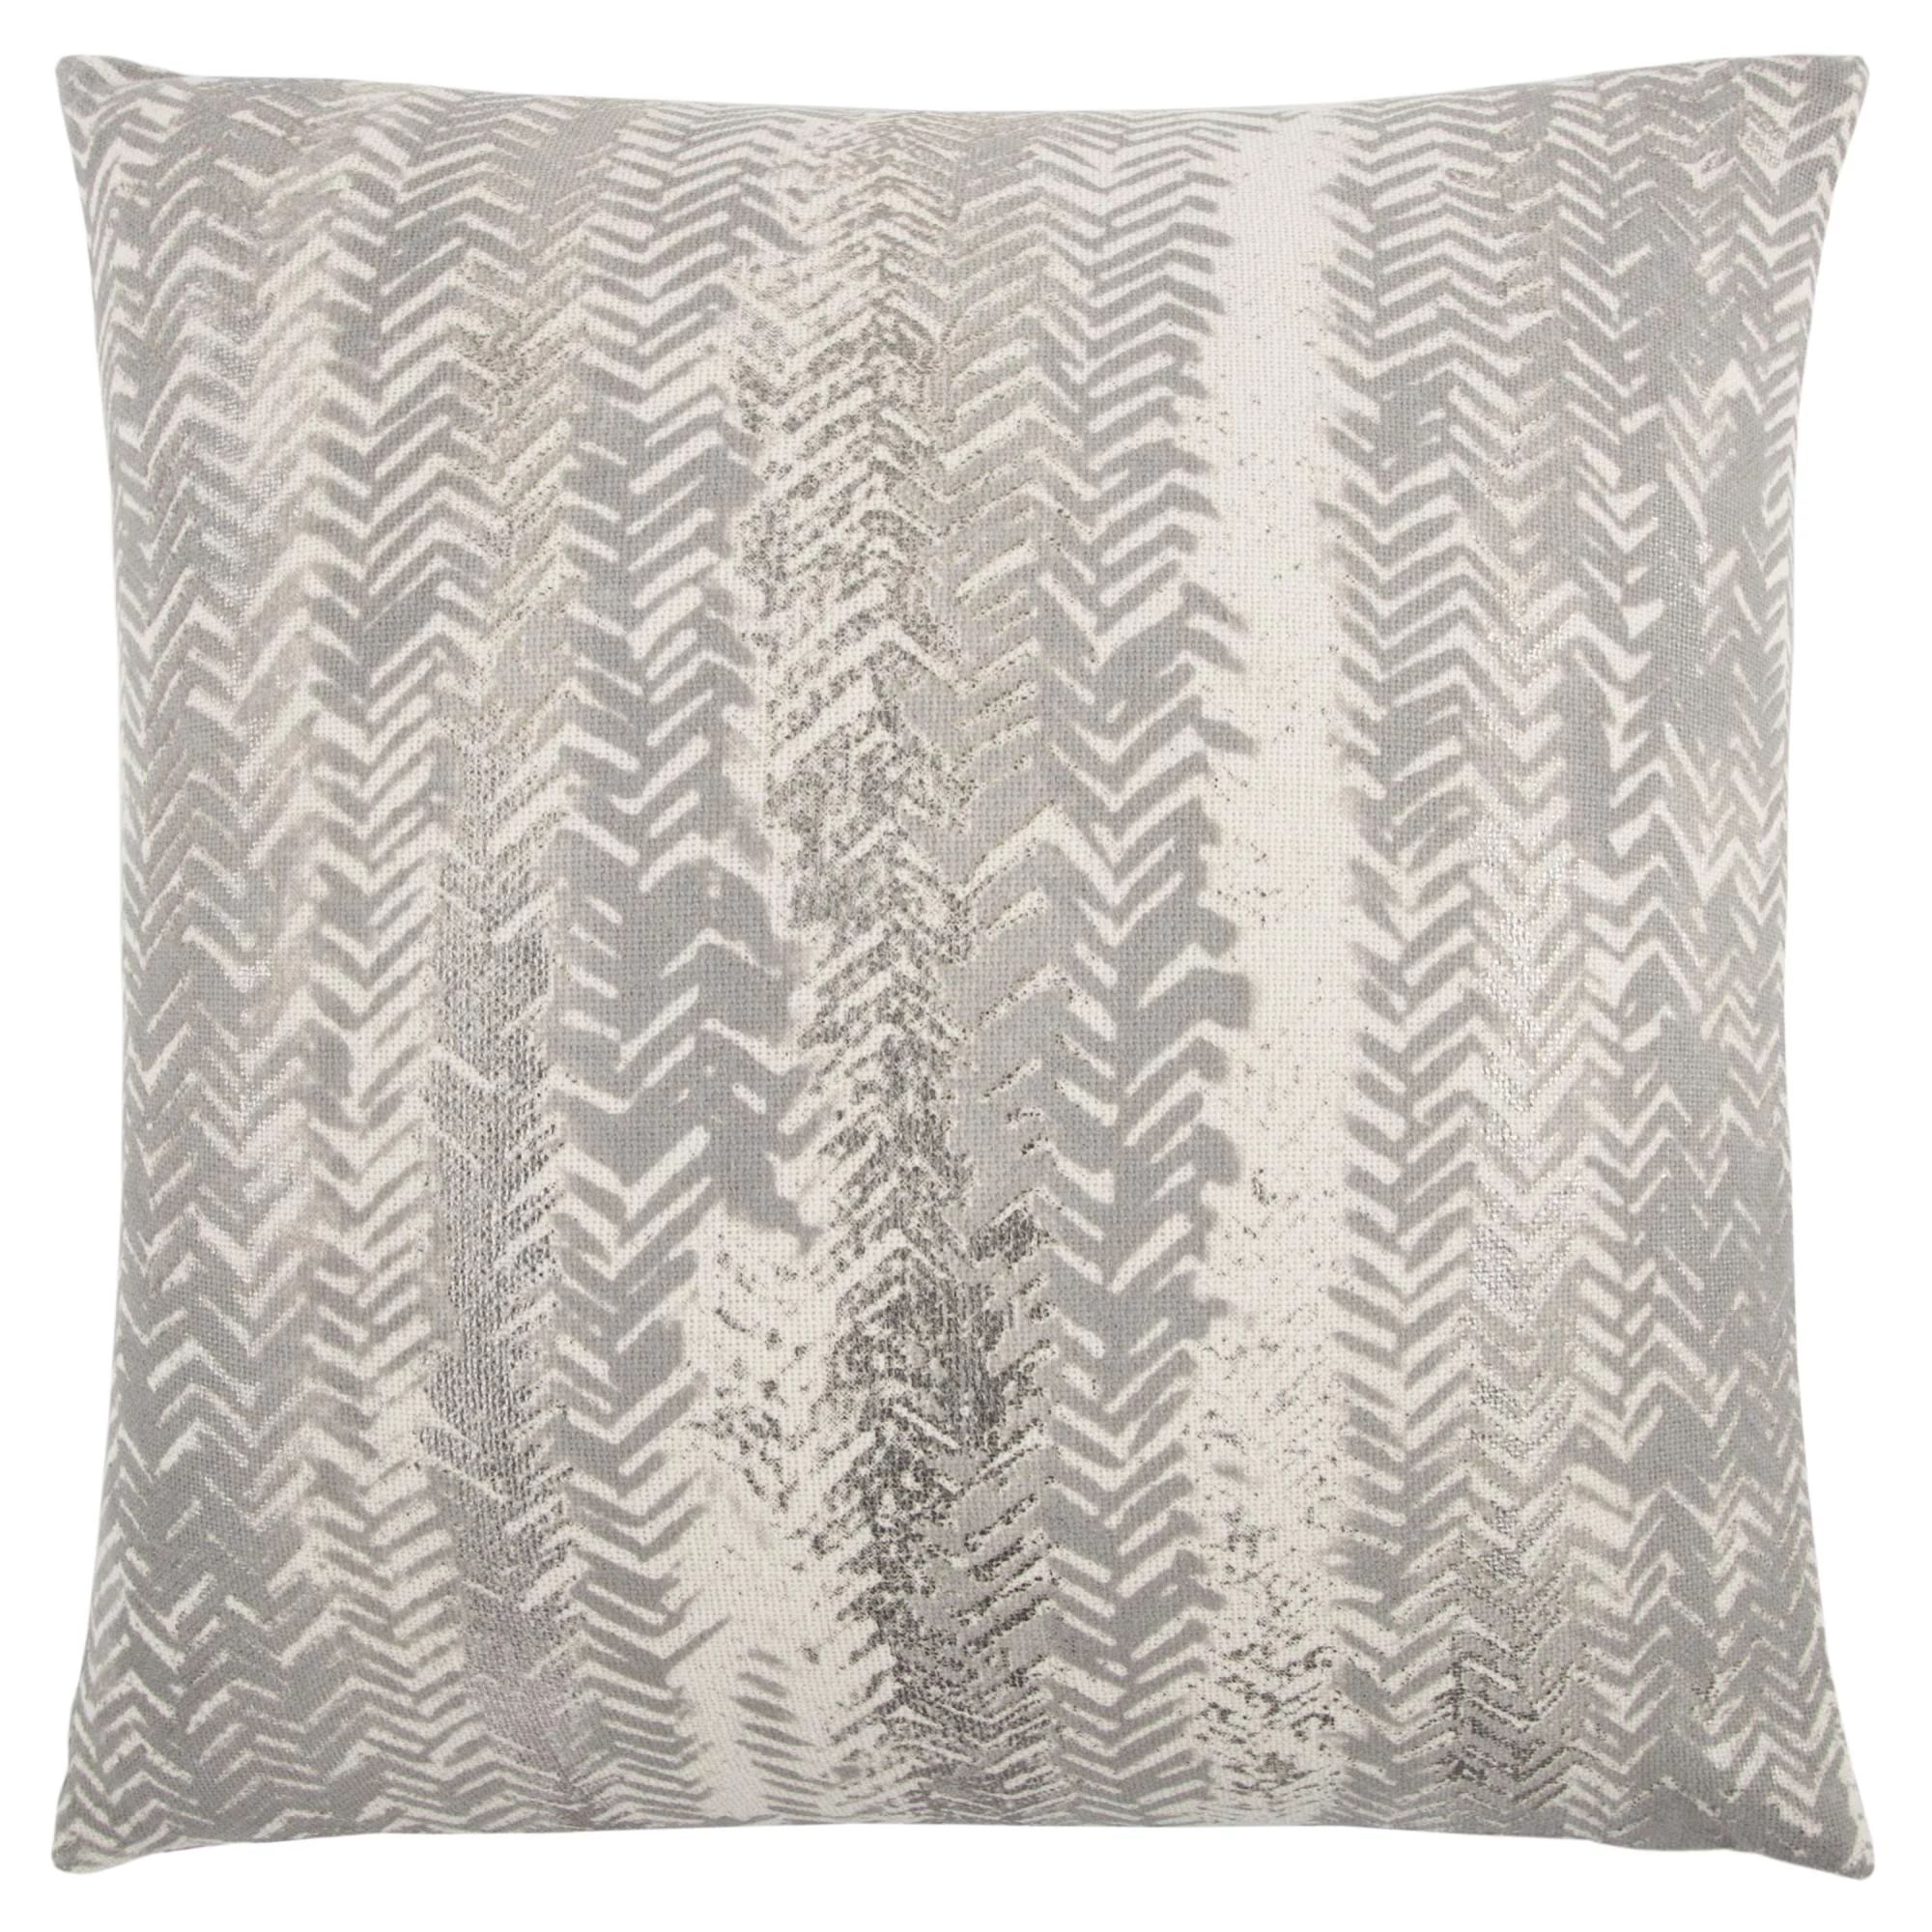 Rizzy Home Throw Pillow T13191 Neutral Metallic Monochrome 20" x 20" Square, Cover Only | Walmart (US)